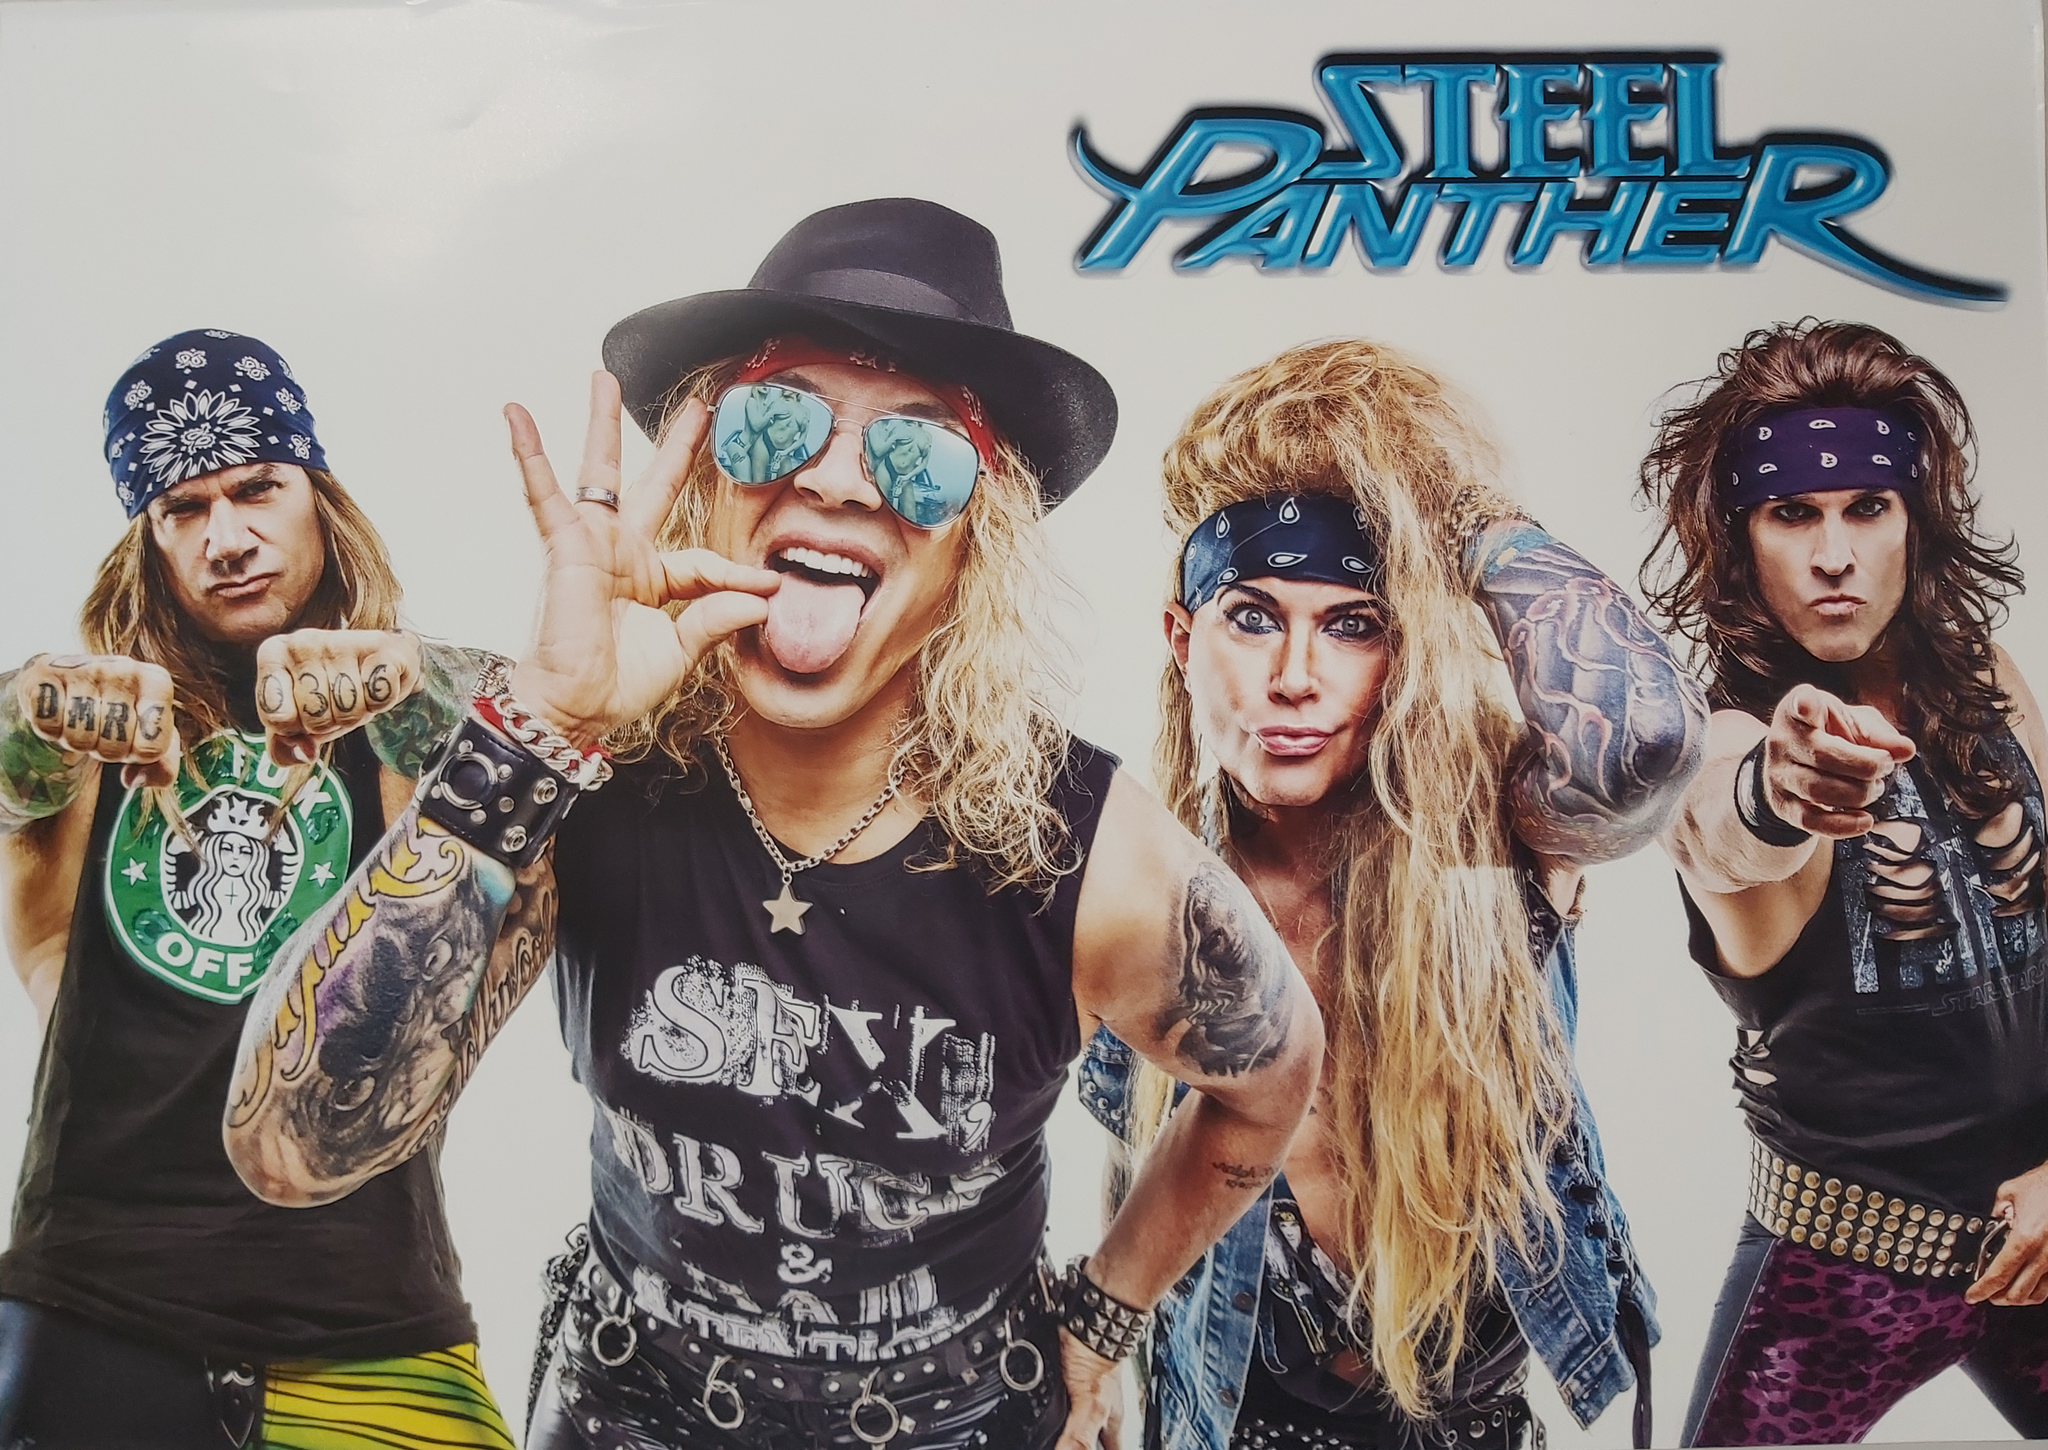 Steel Panther 2020 Tour Poster